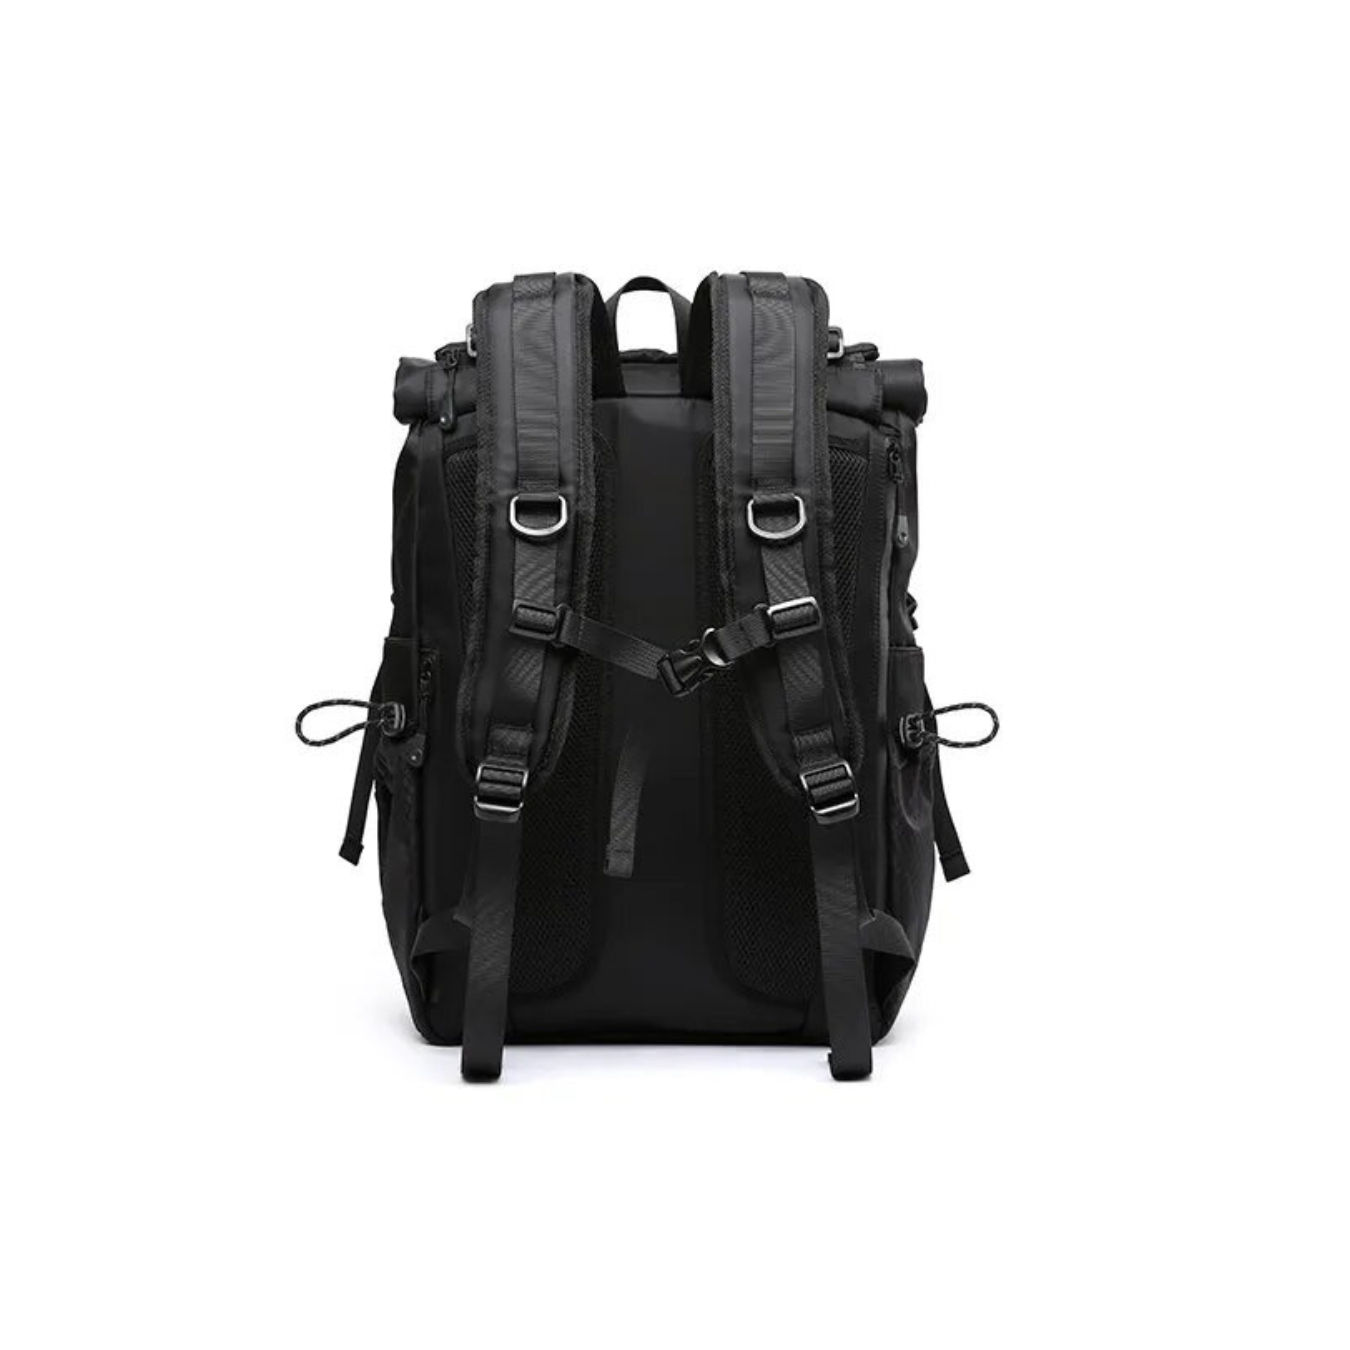 The Everything Backpack